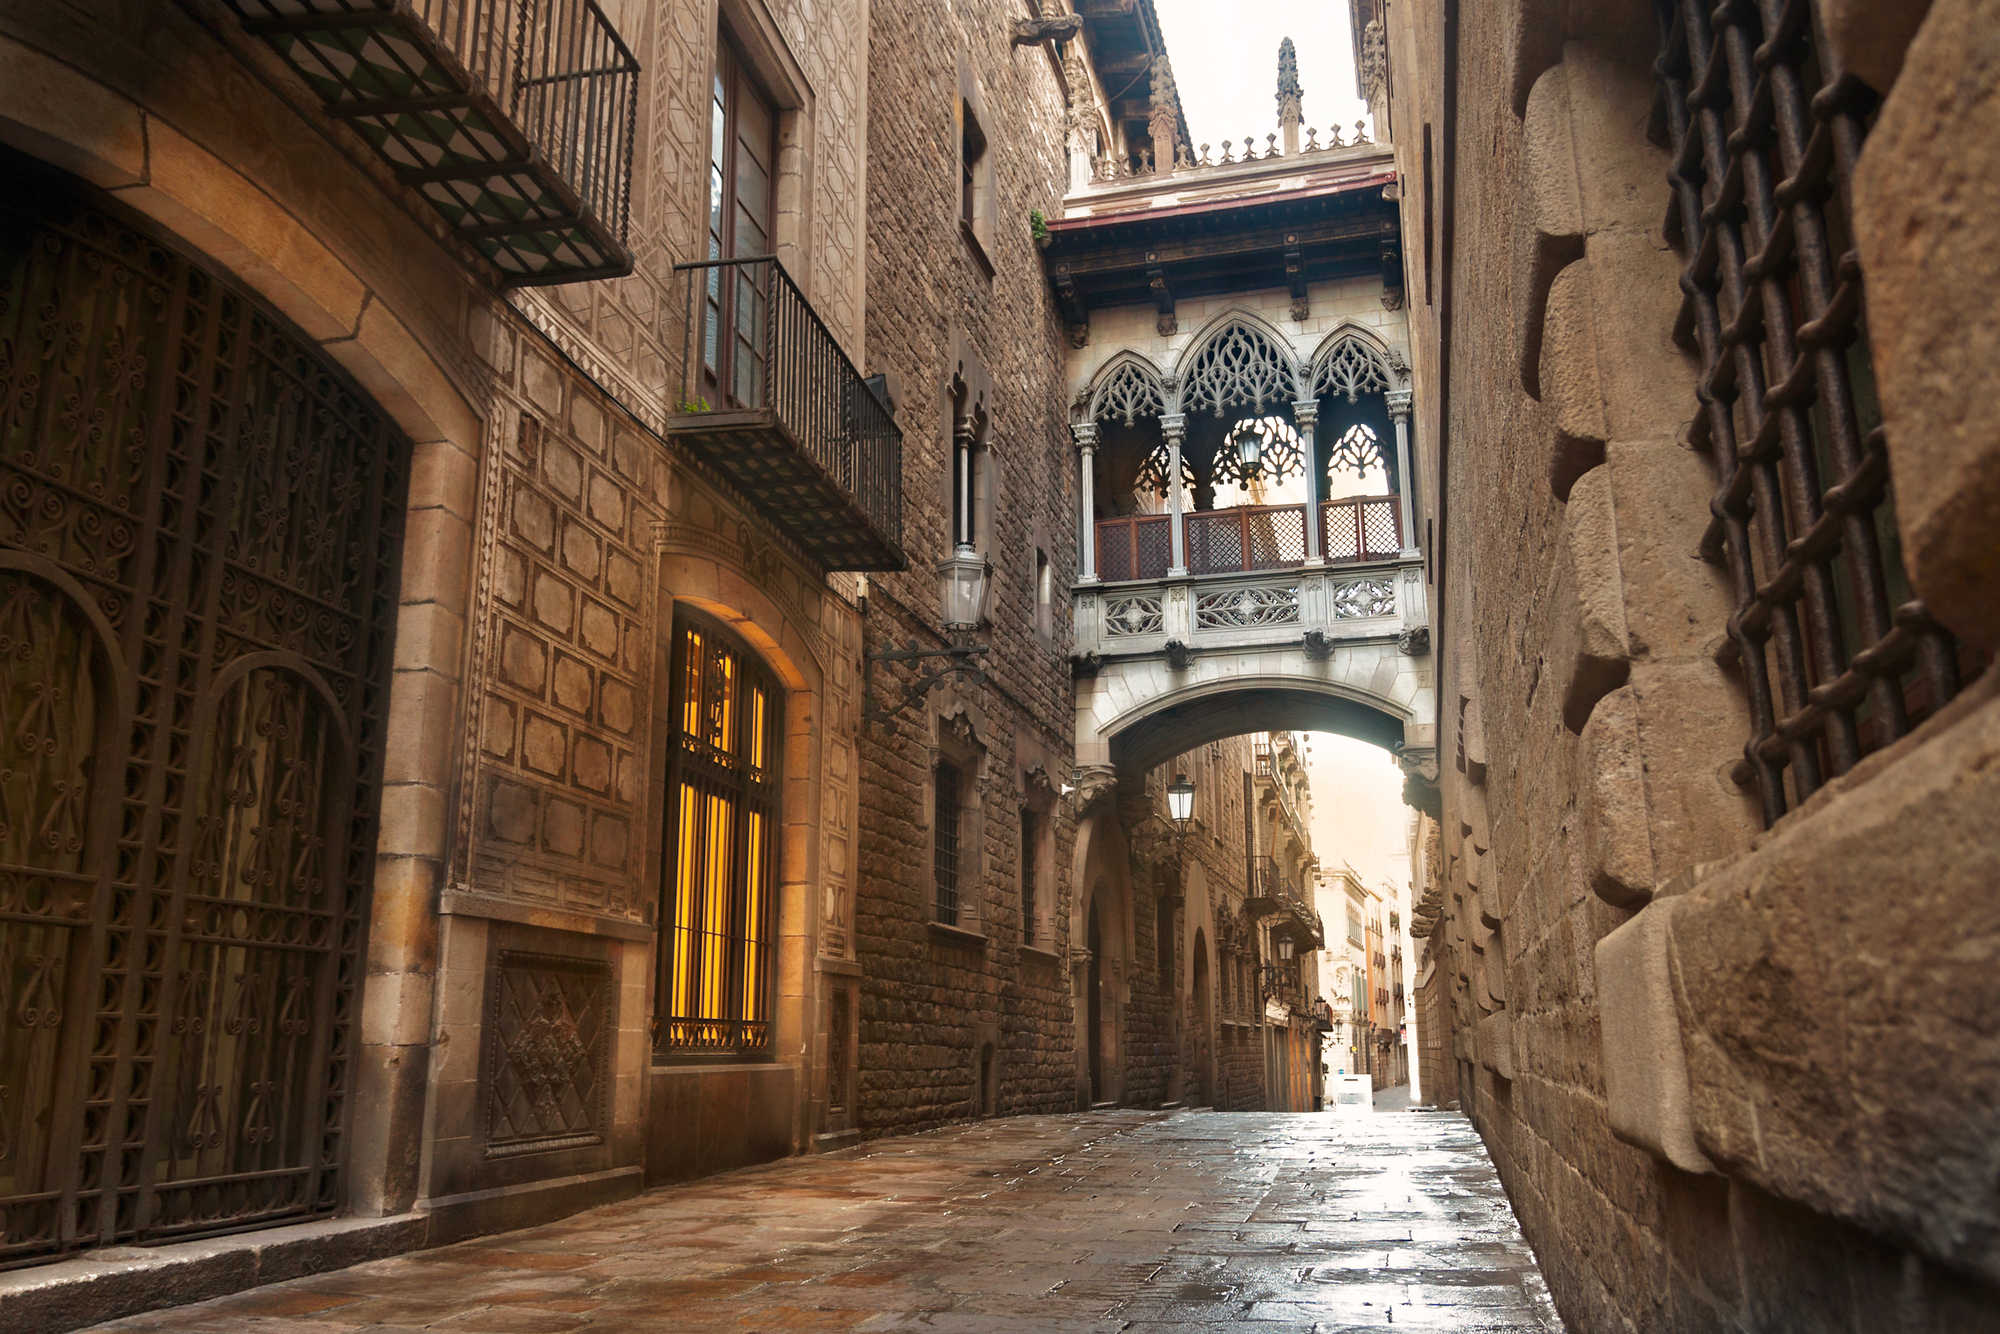 An introduction to the history of Barcelona